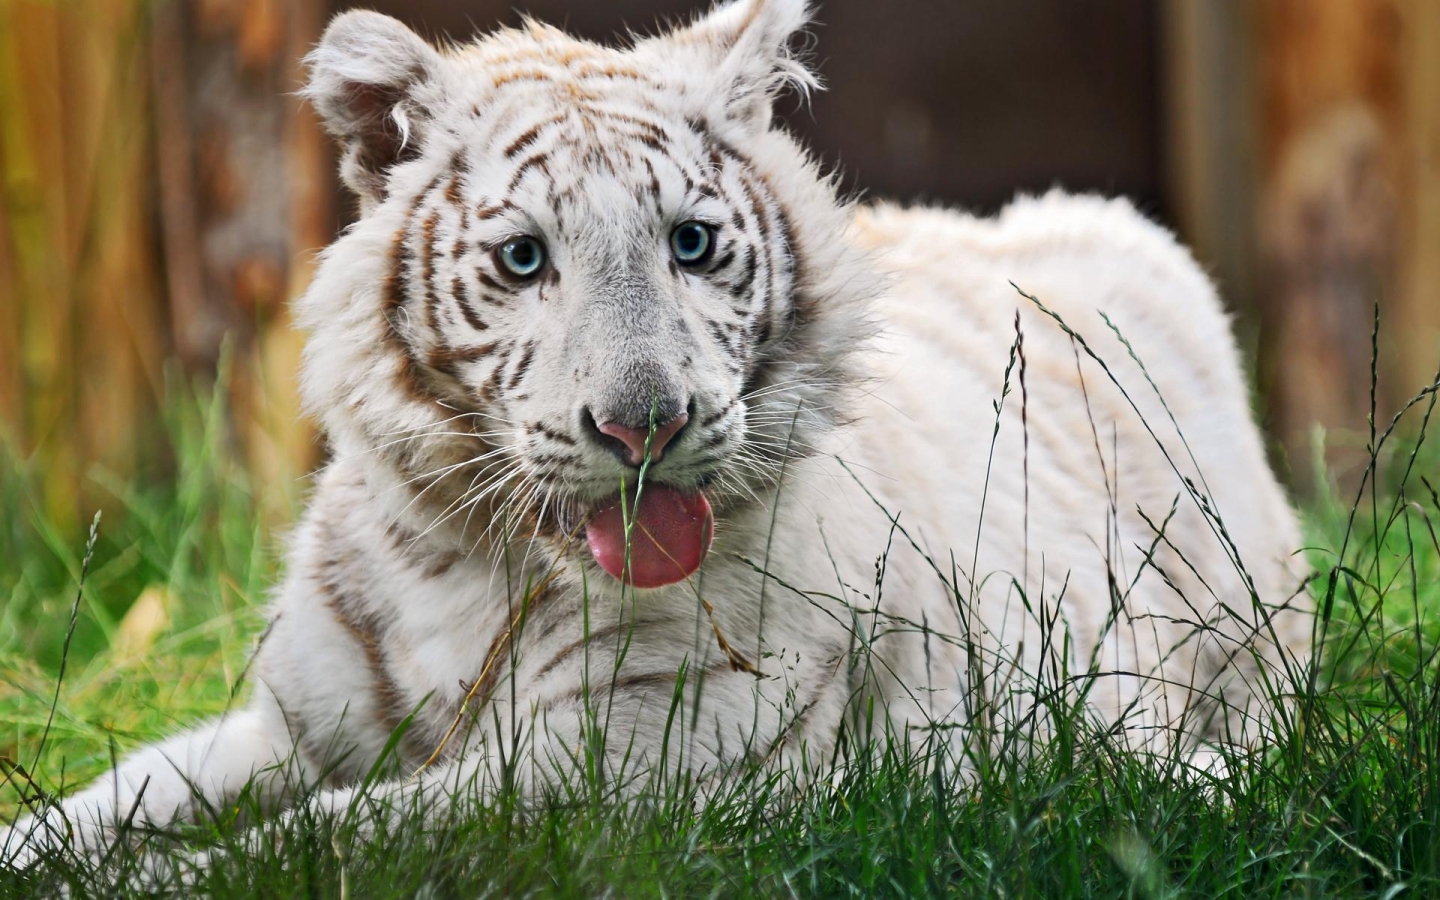 tiger photo white tiger wallpaper widescreen lion and white tiger 1440x900